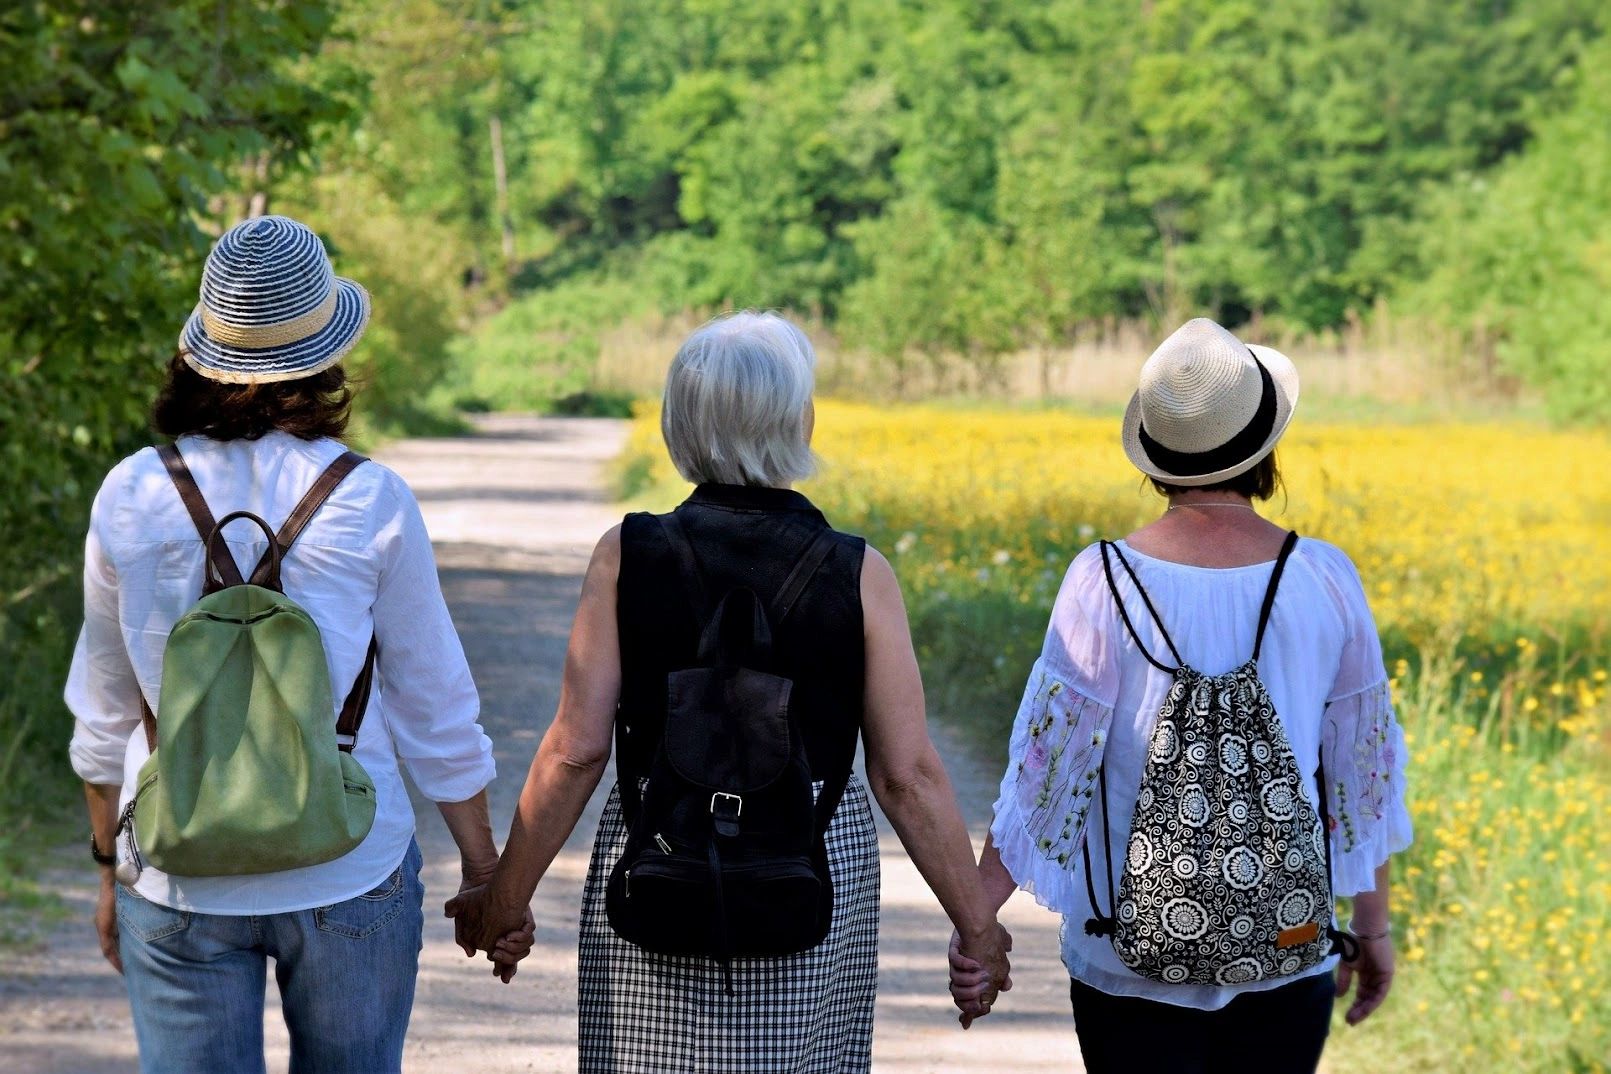 Three active women walking hand in hand through a green meadow on a sunny day.